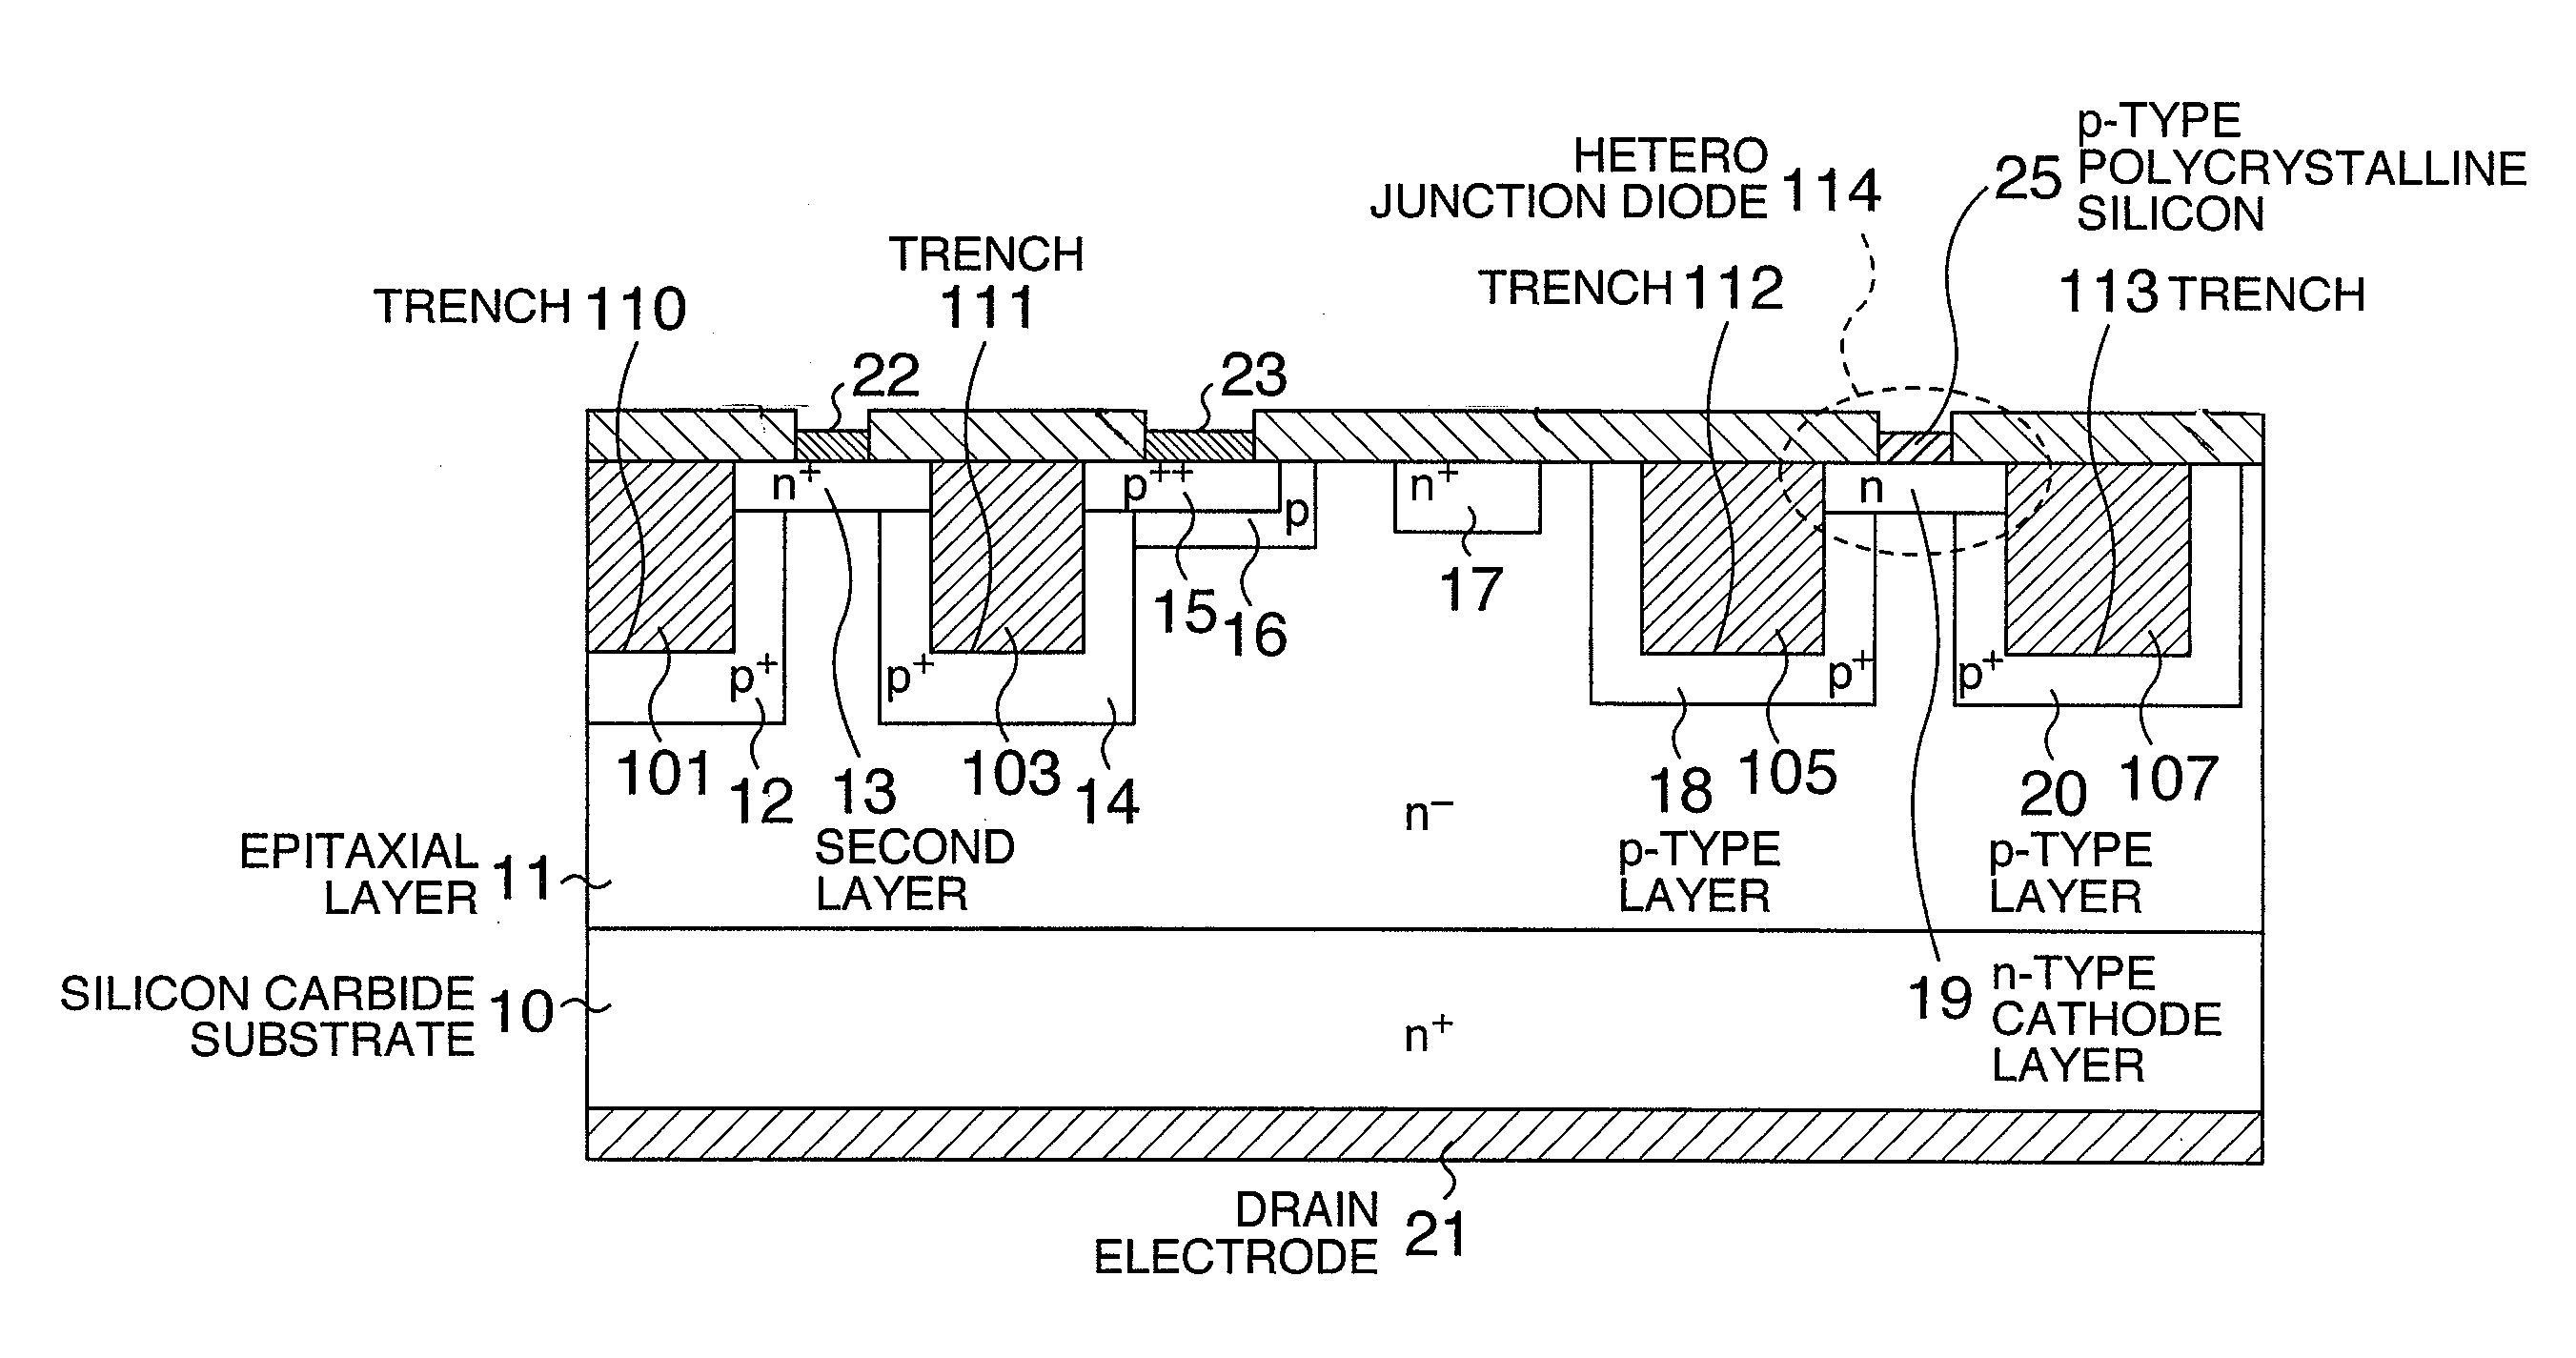 Semiconductor device including a vertical field effect transistor, having trenches, and a diode